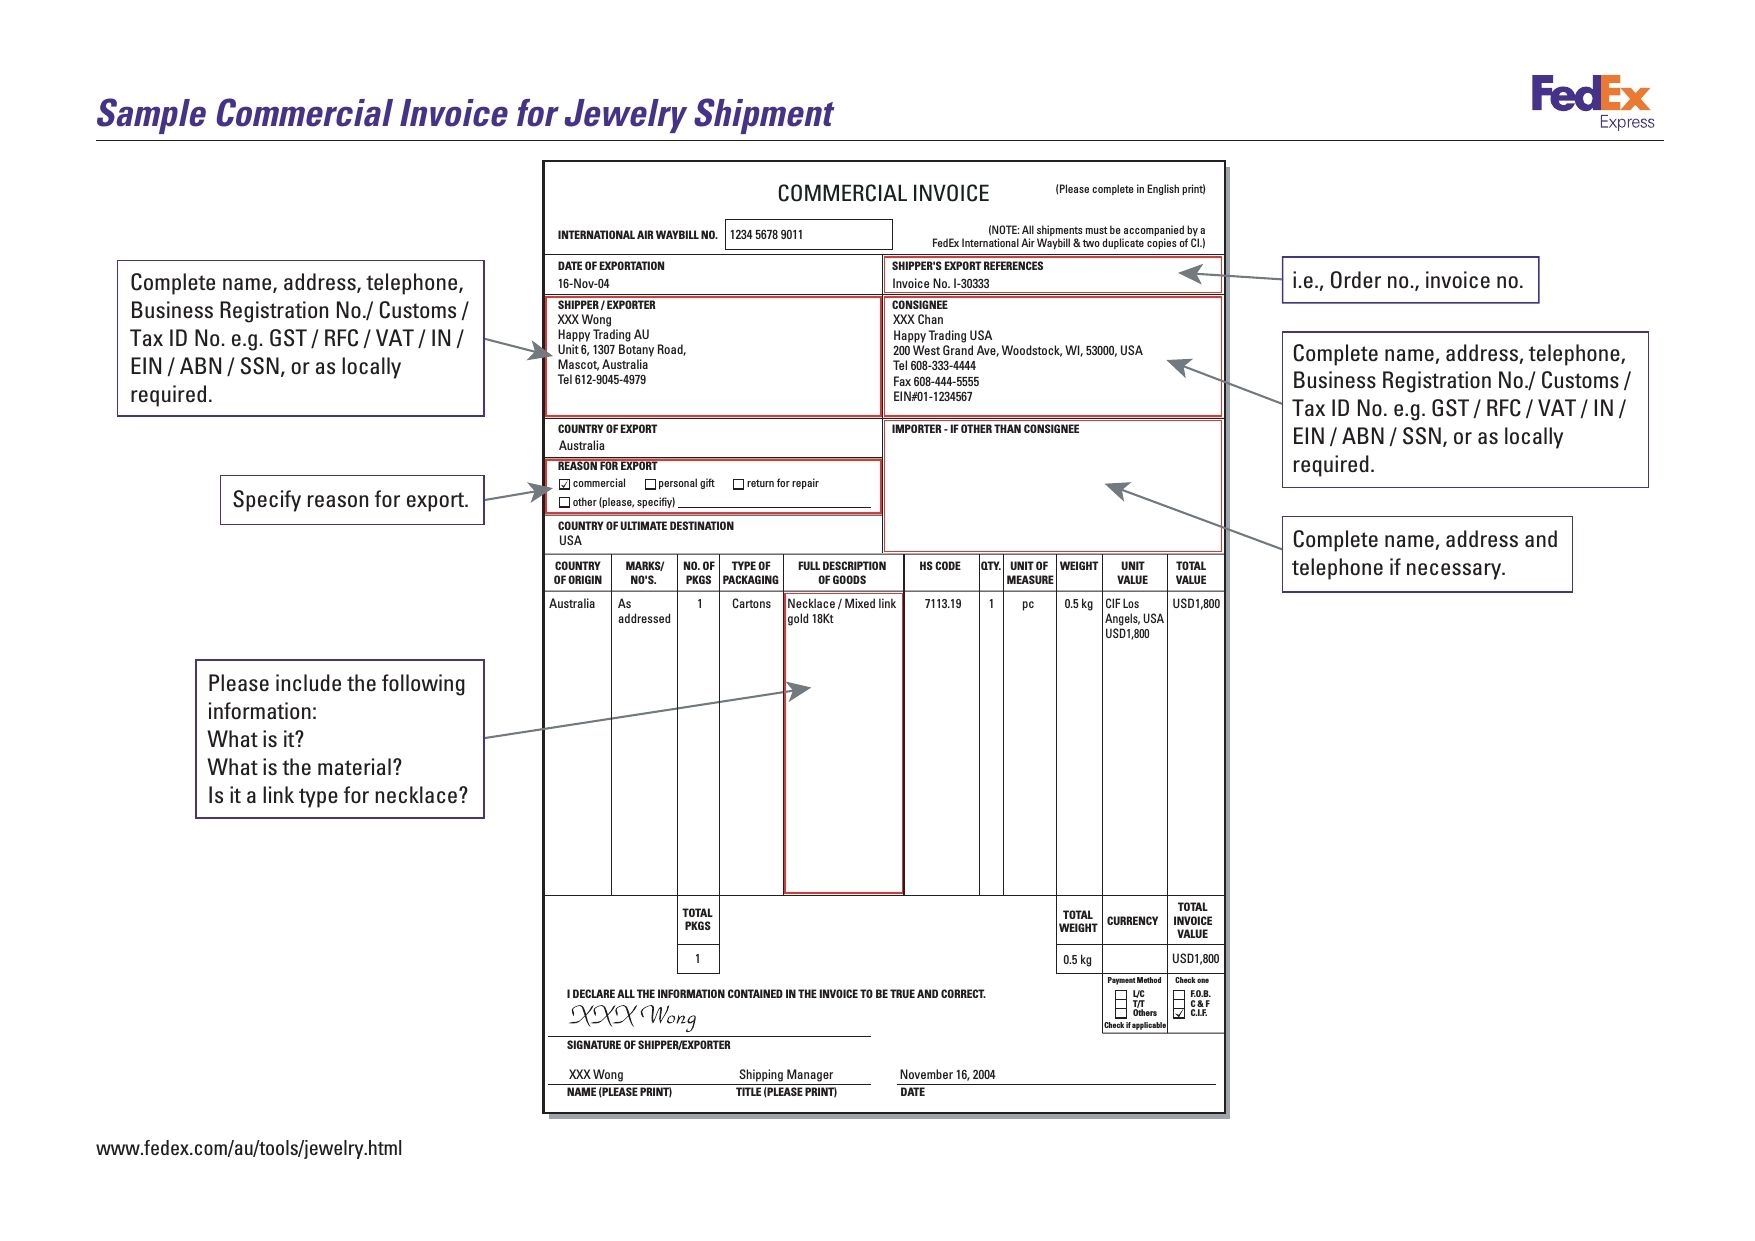 sample commercial invoice for jewelry shipment no commercial invoice with no commercial value